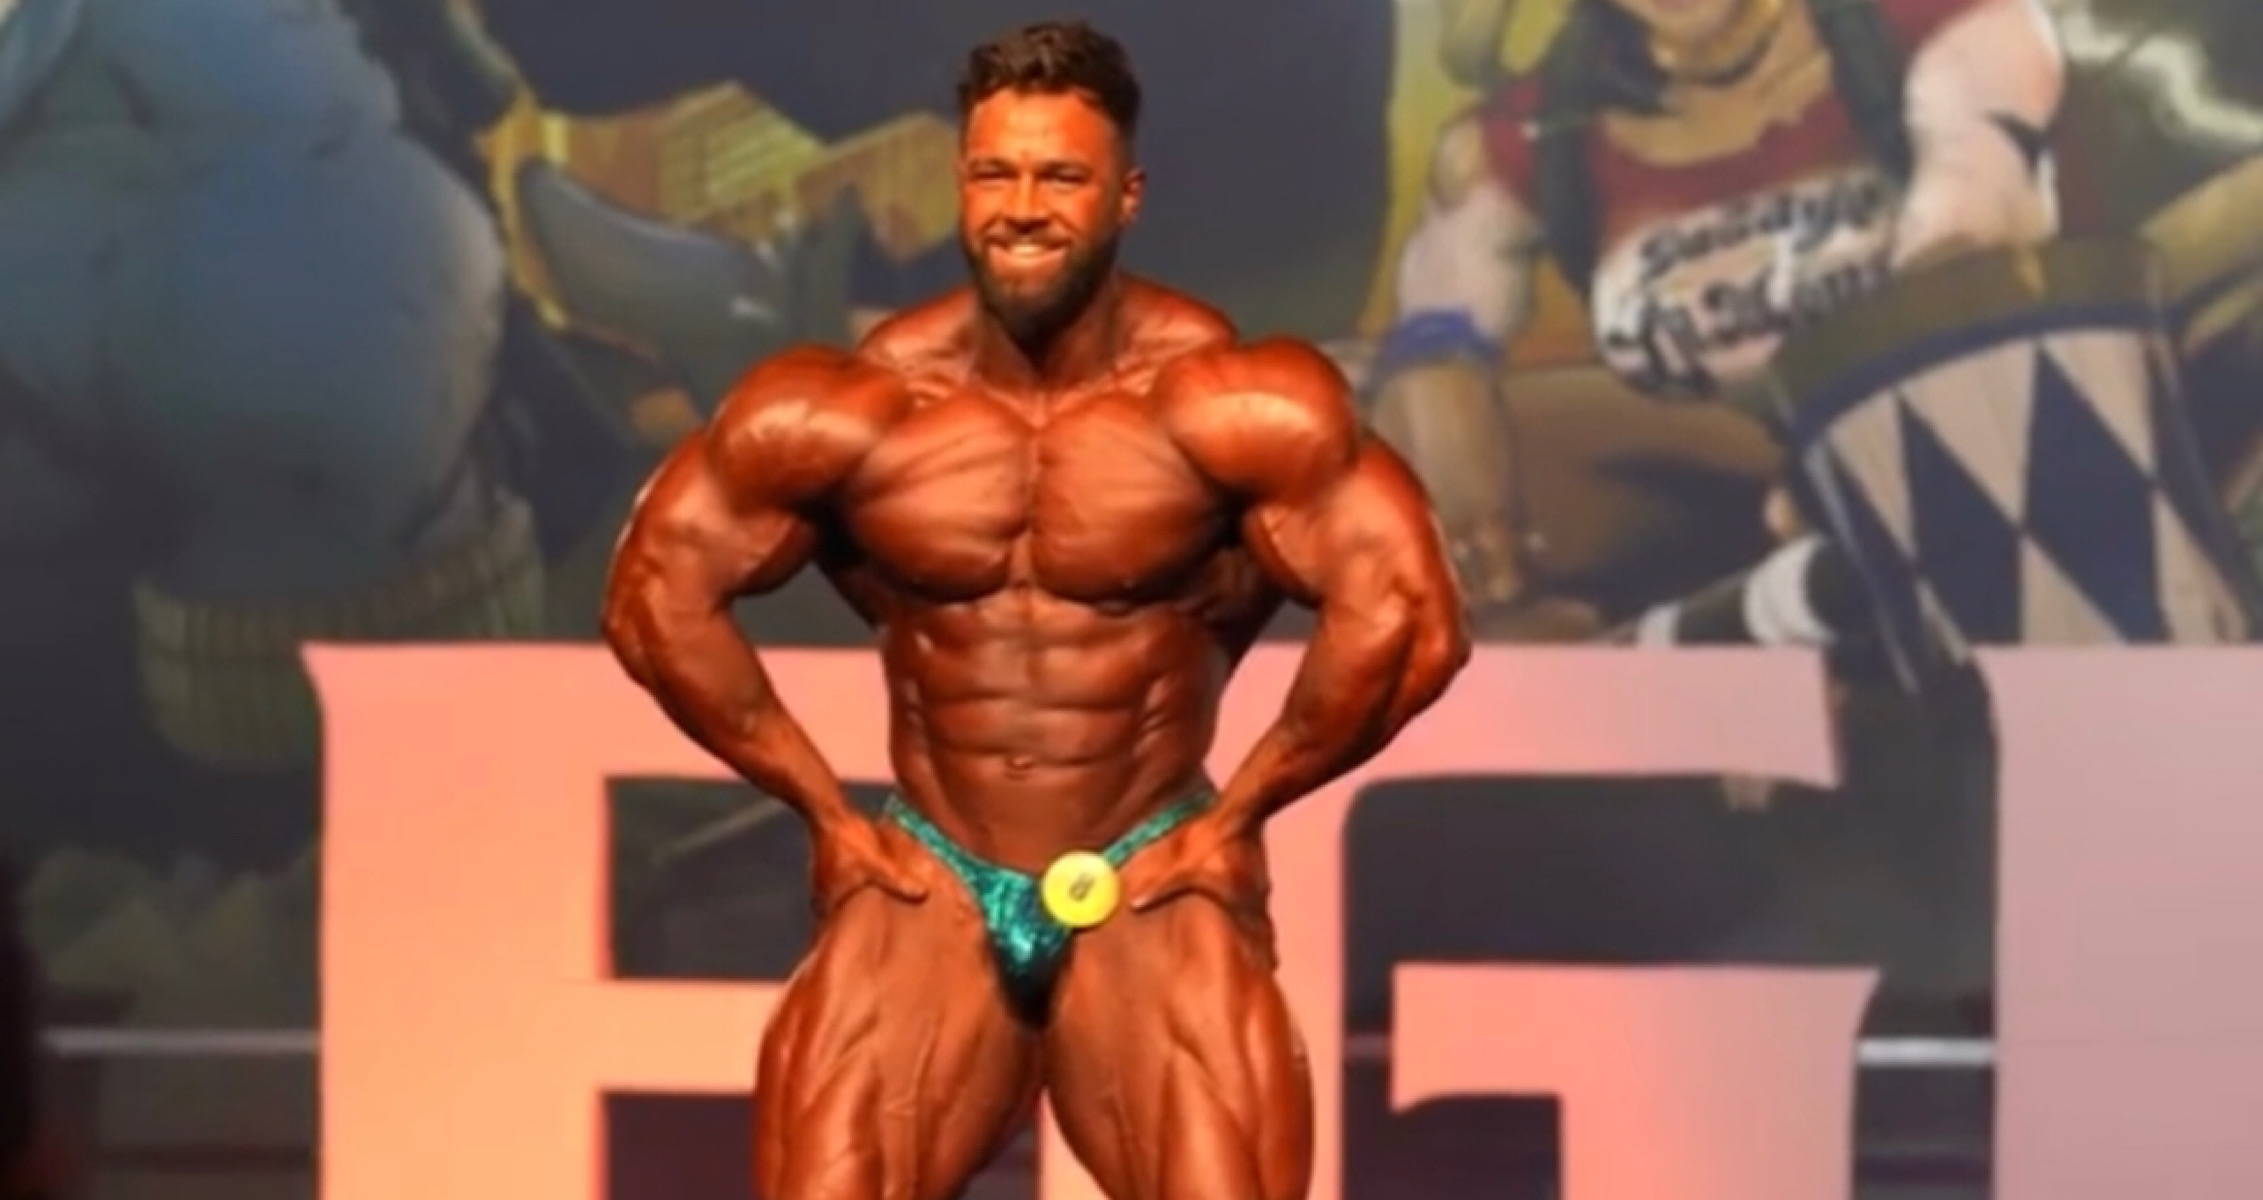 Milos Sarcev Says Regan Grimes can become Mr. Olympia in 3 Years